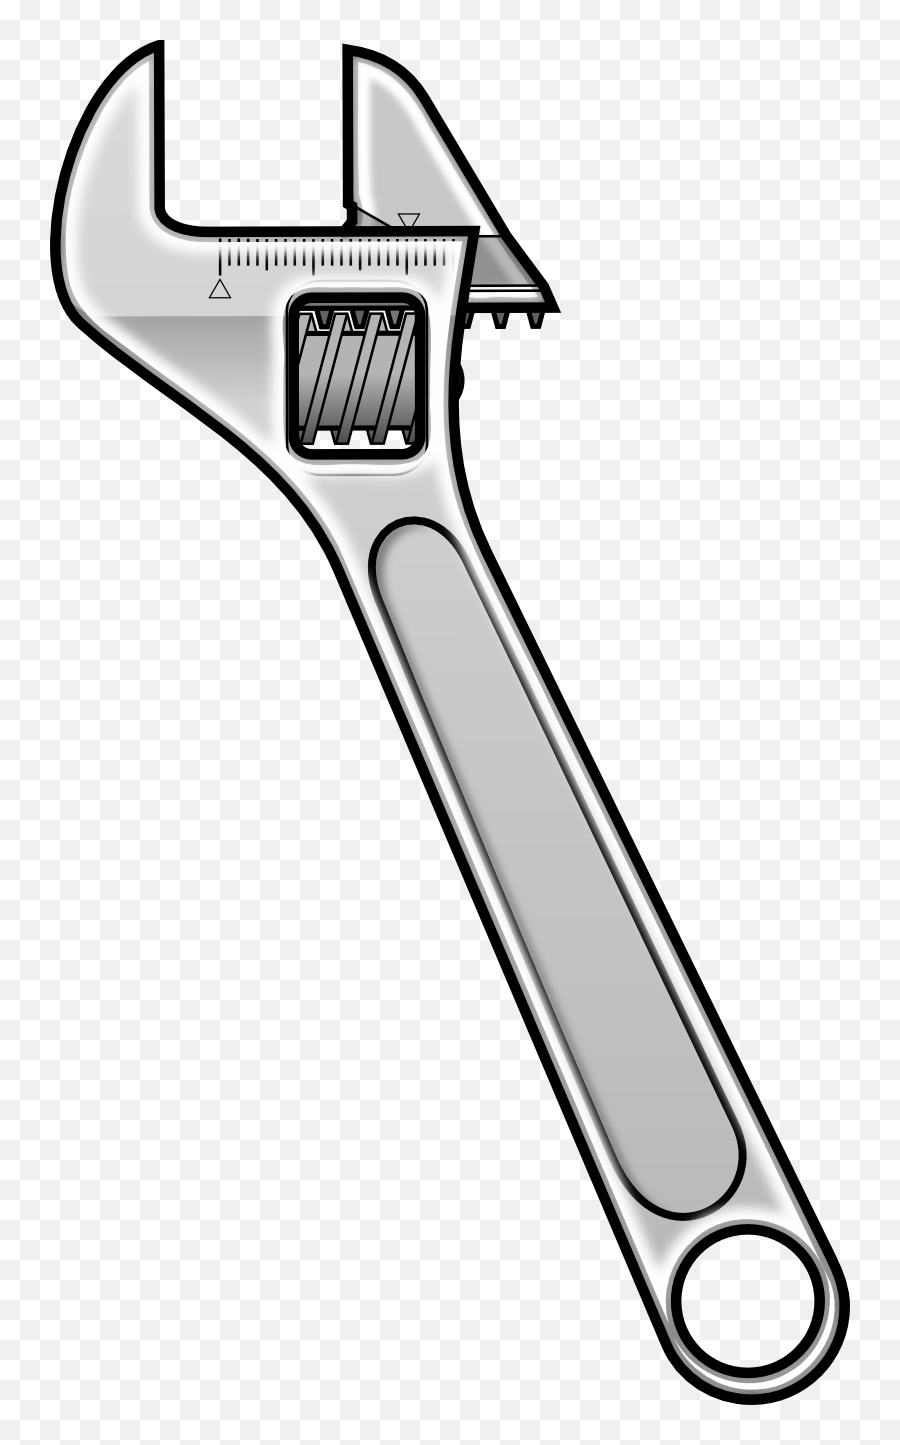 Wrench - Transition Png,Wrench Transparent Background